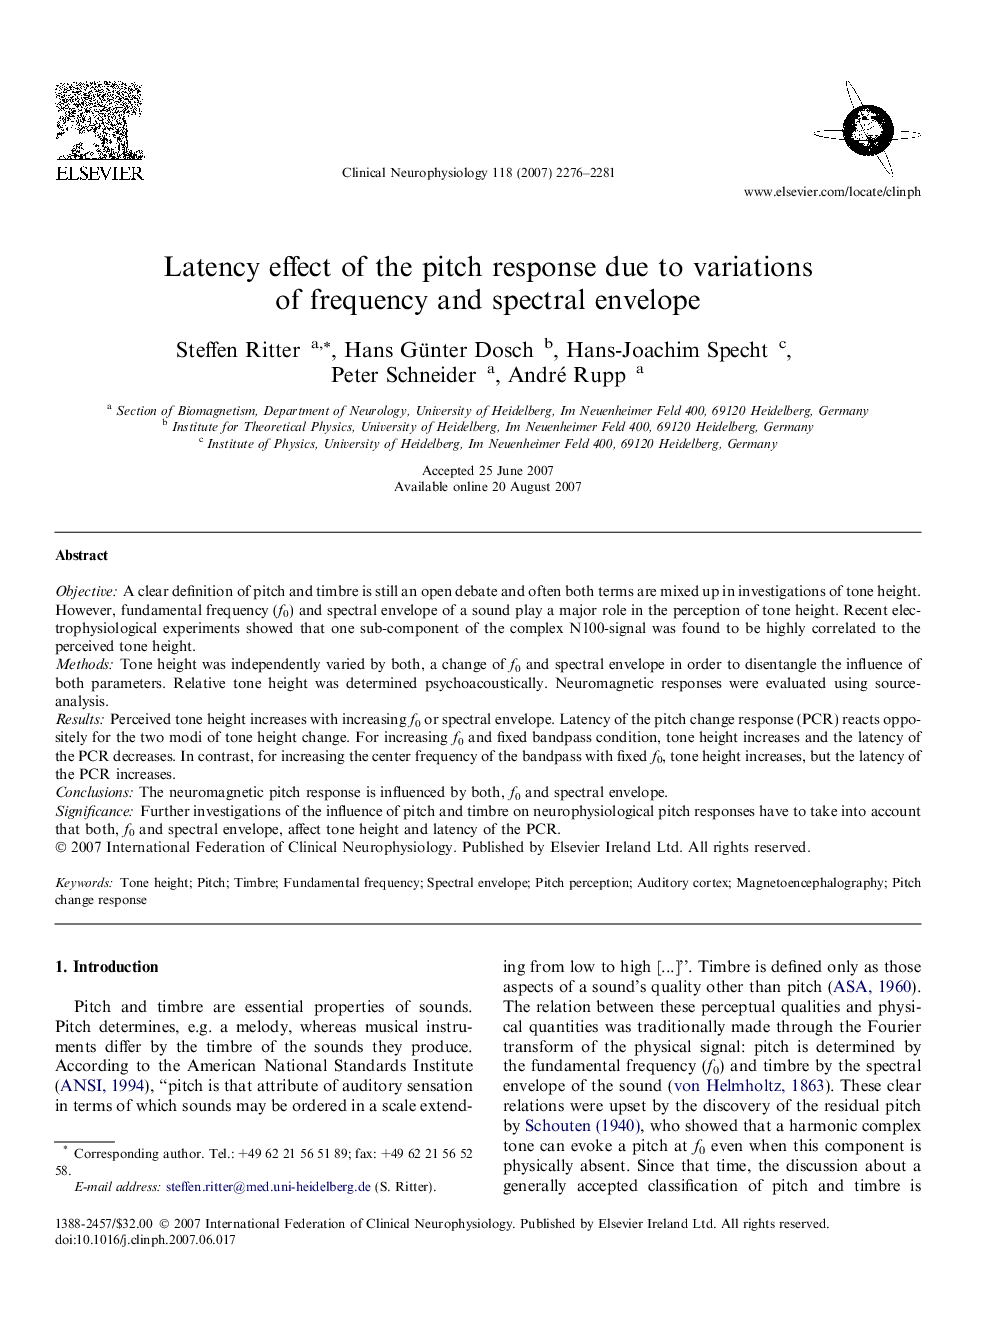 Latency effect of the pitch response due to variations of frequency and spectral envelope